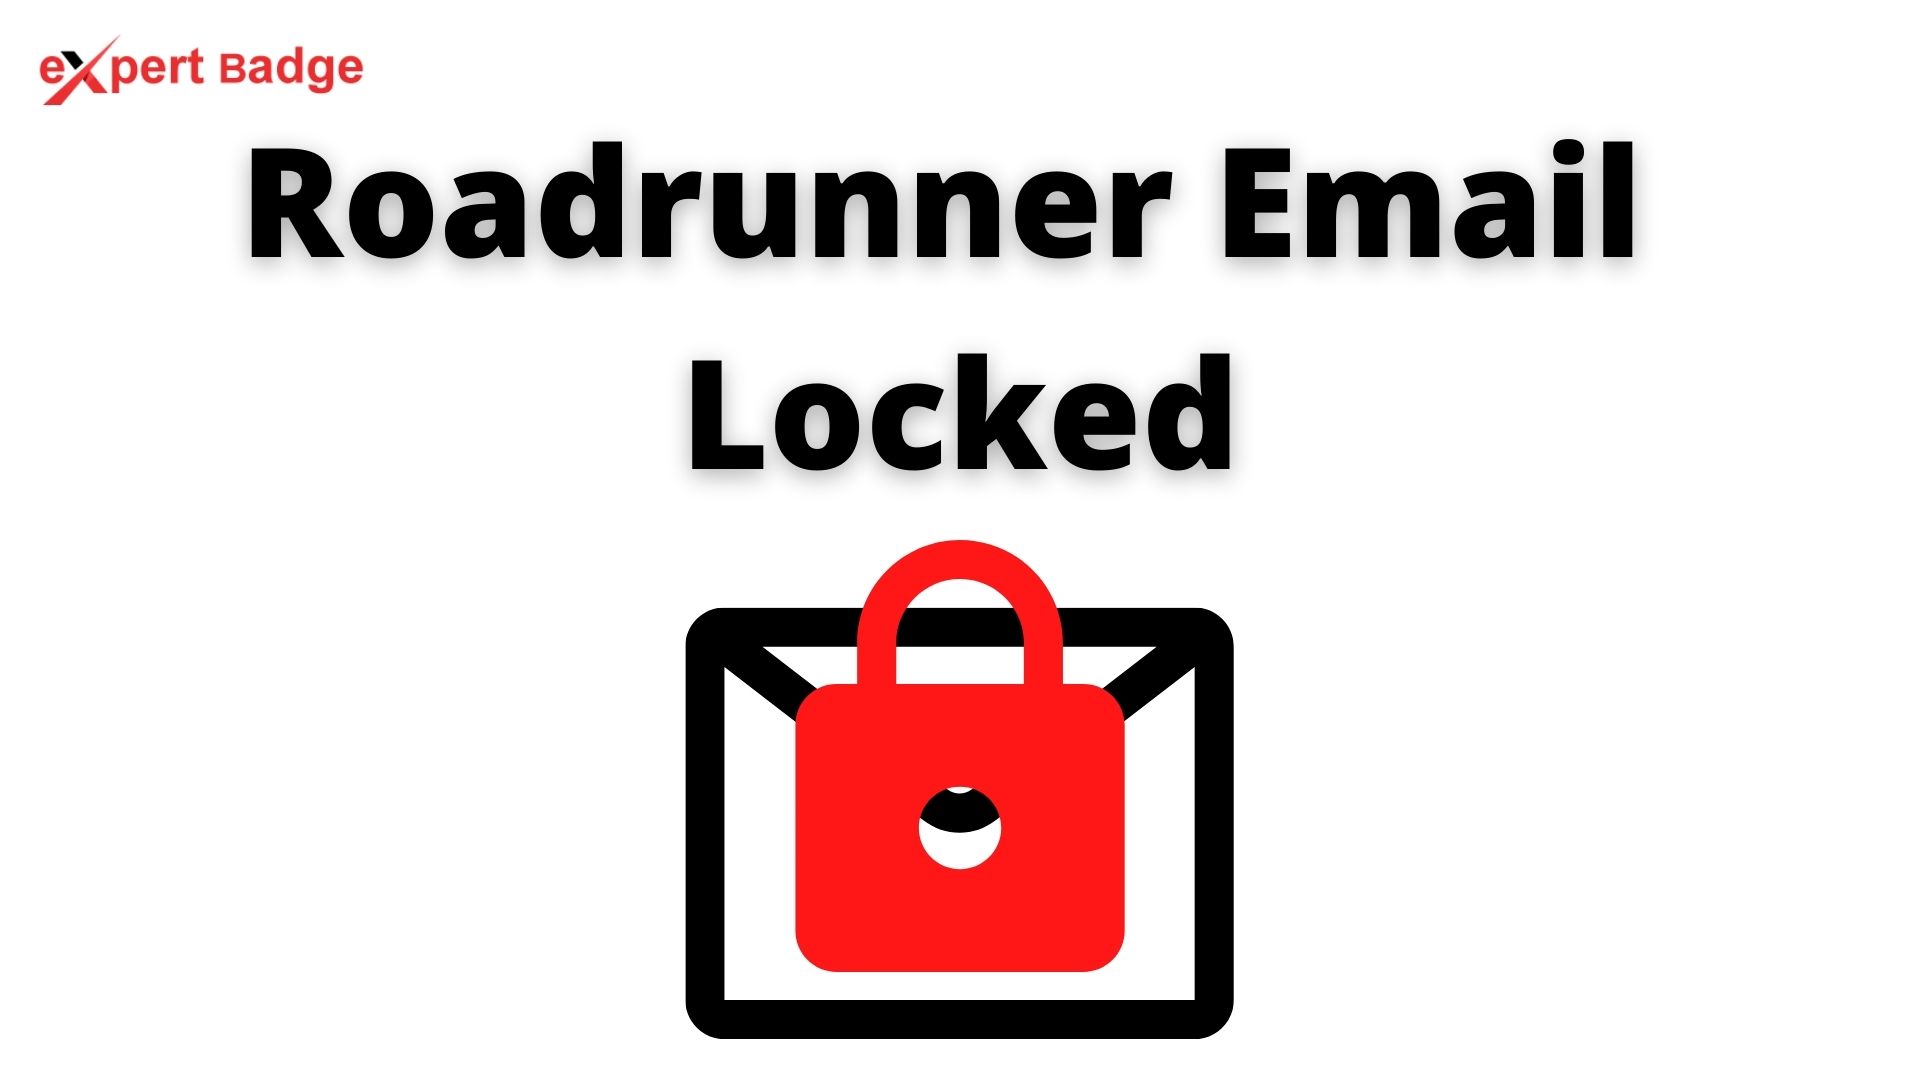 Why Is My Roadrunner Email Locked?